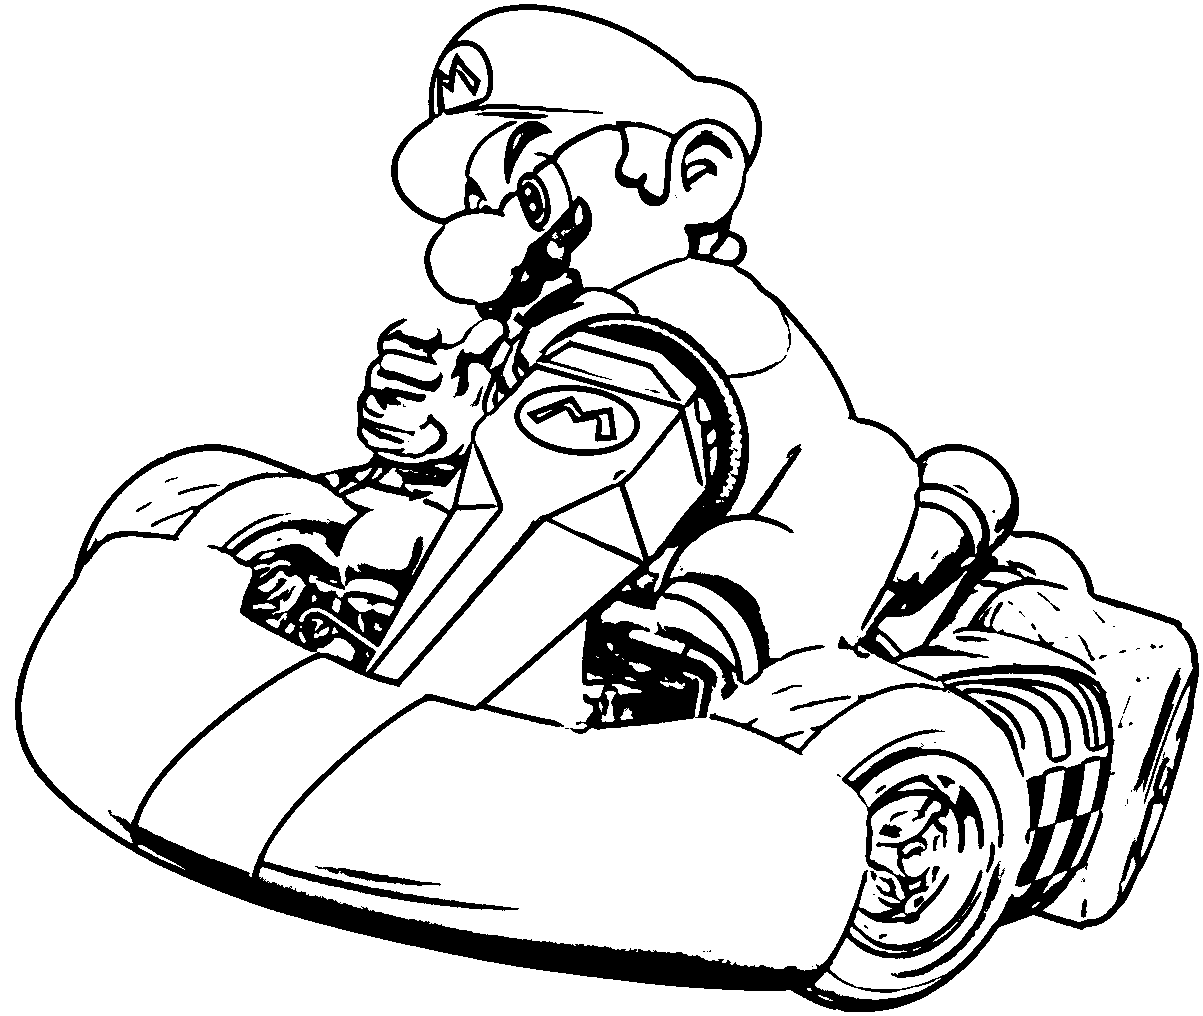 Mario Kart Coloring Pages | Wecoloringpage